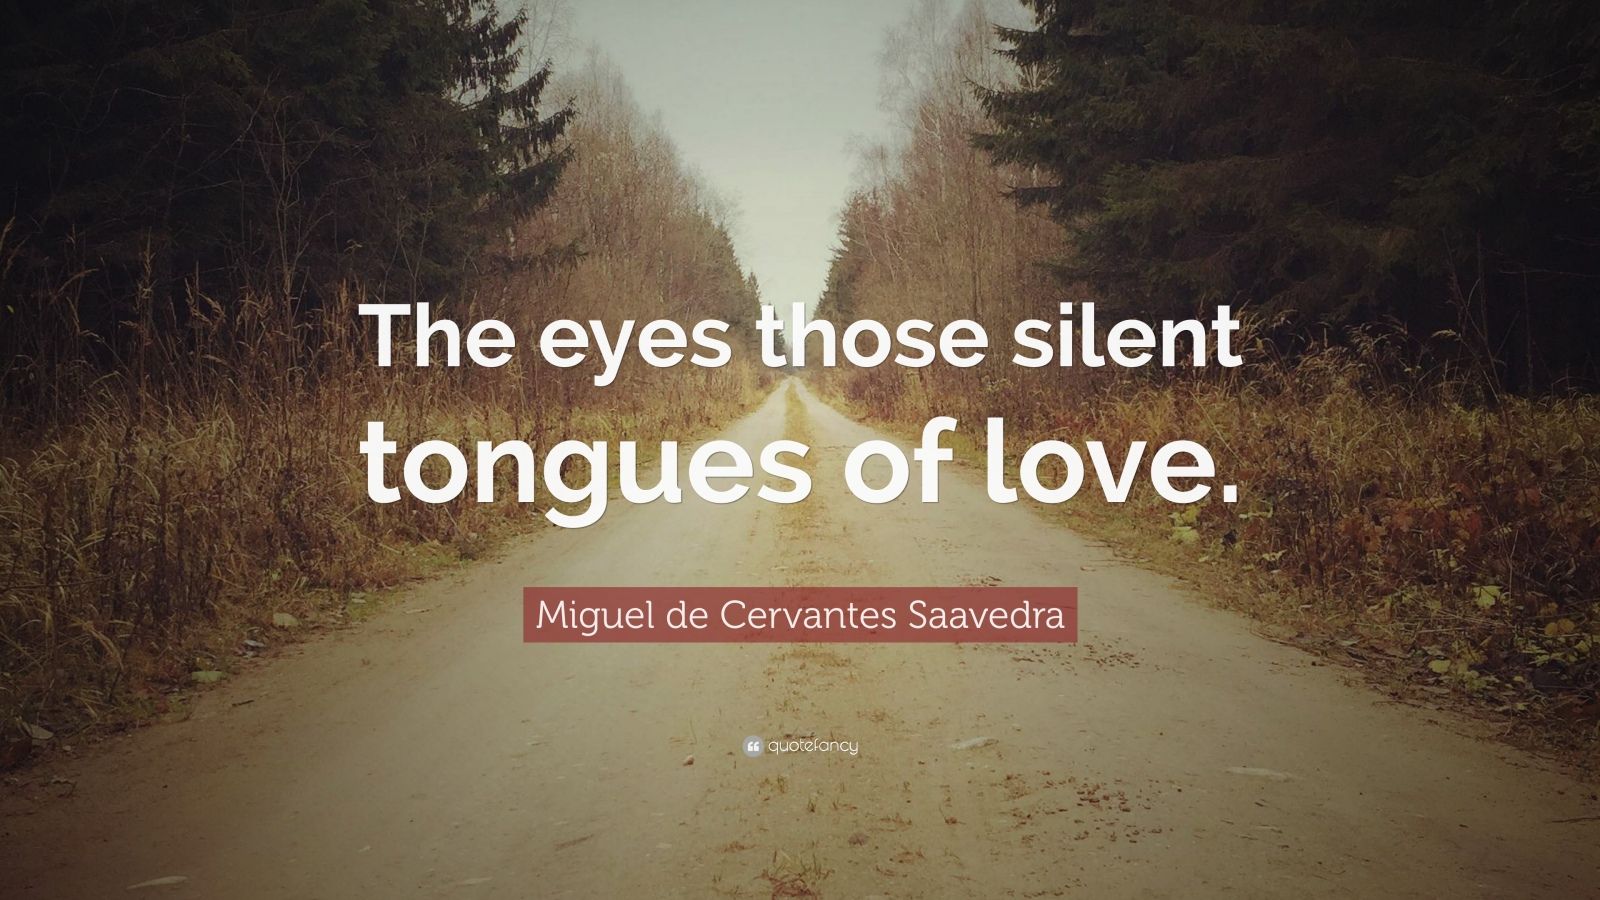 Miguel de Cervantes Saavedra Quote: "The eyes those silent tongues of love." (7 wallpapers ...